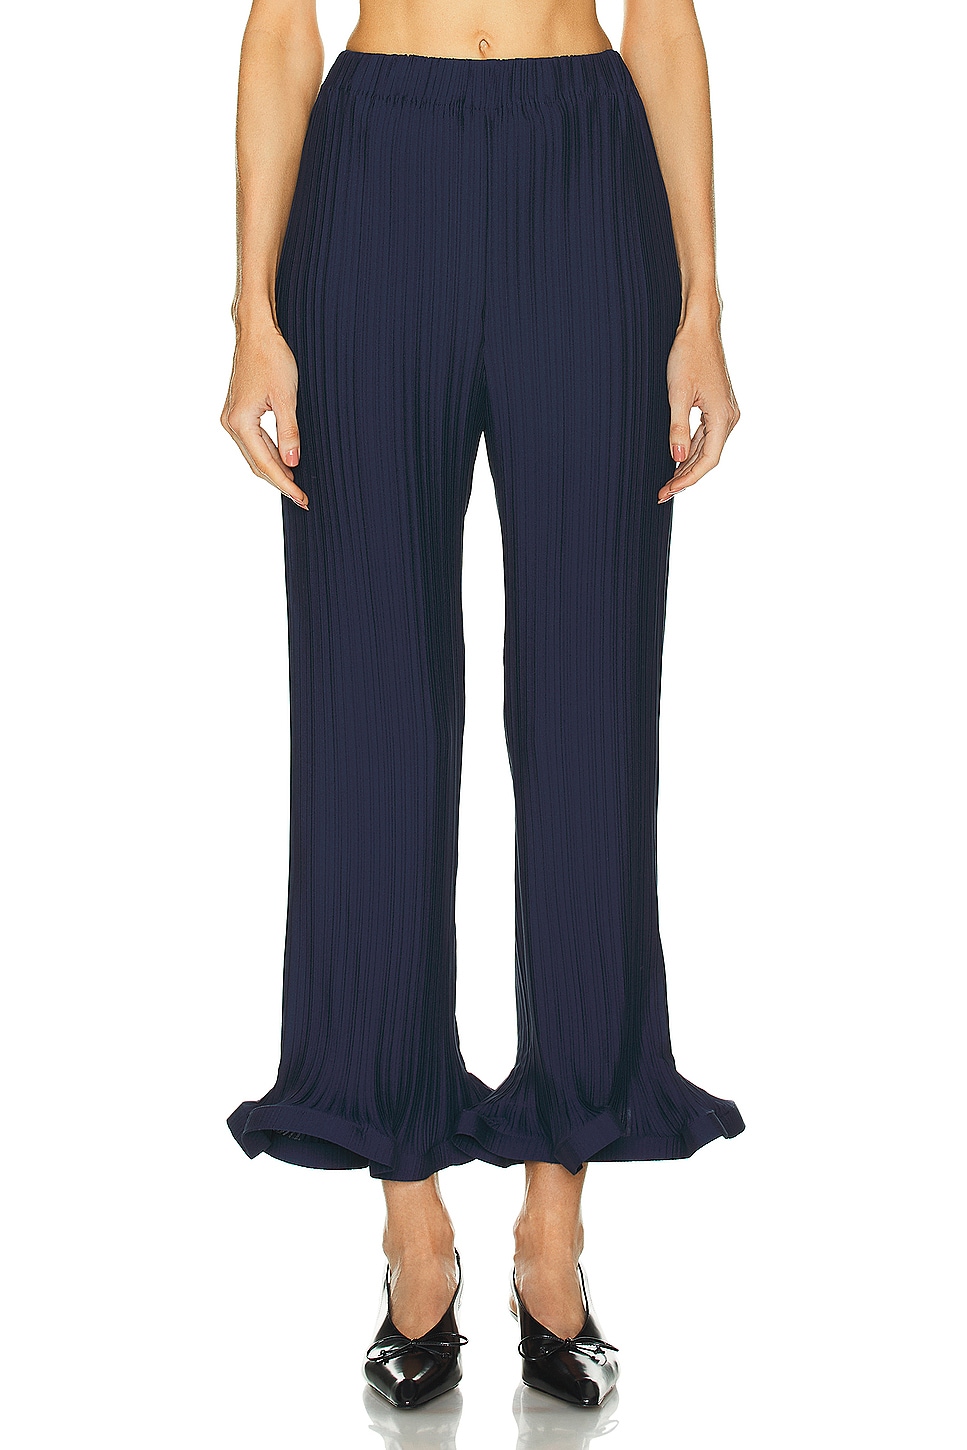 Image 1 of Rowen Rose Pleated Pant in Navy Blue